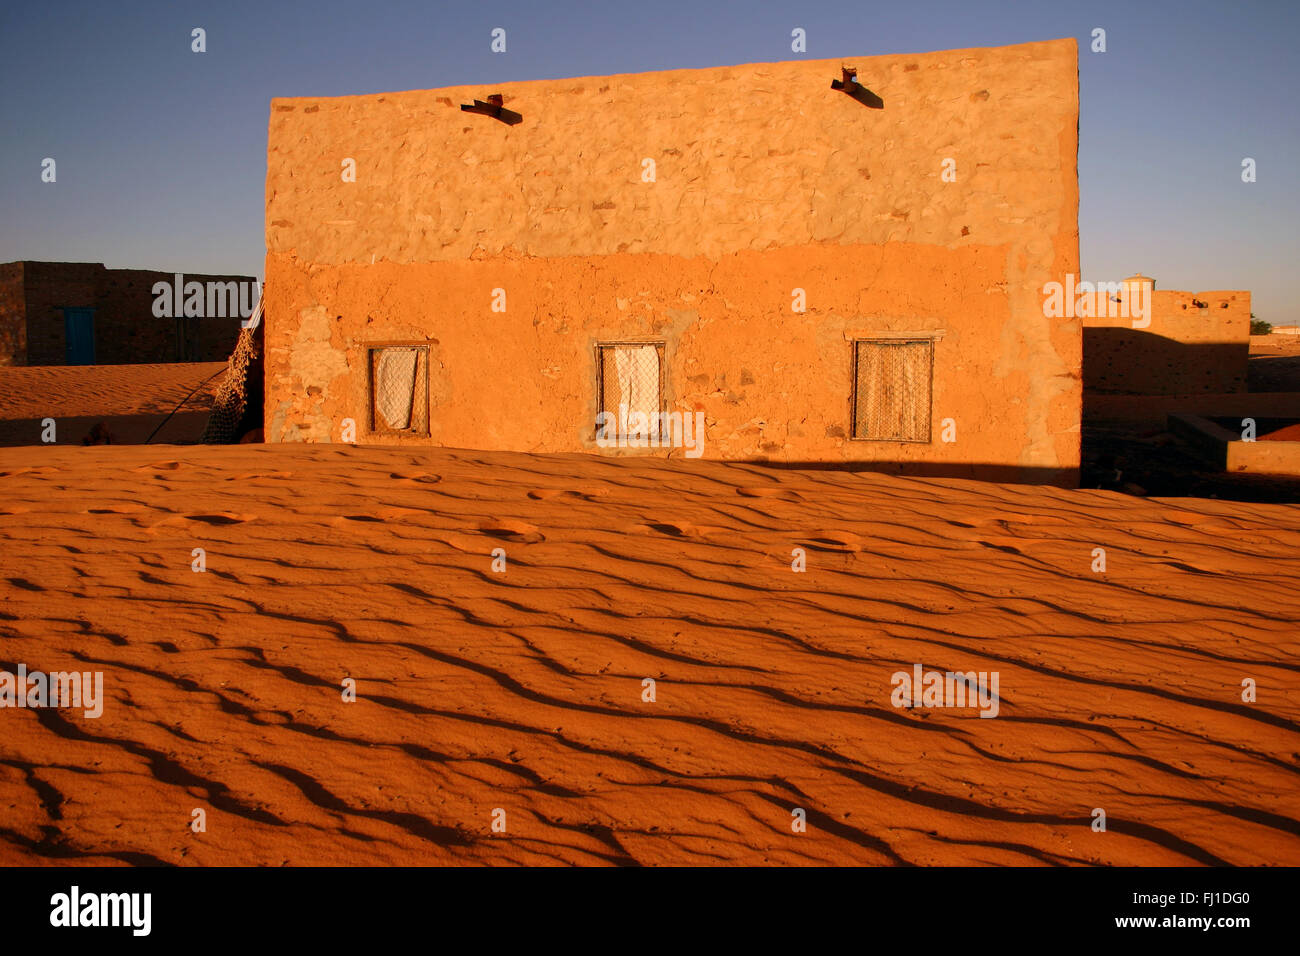 Chinguetti : architecture , house almost buried in the Sahara sands in the desert city Stock Photo